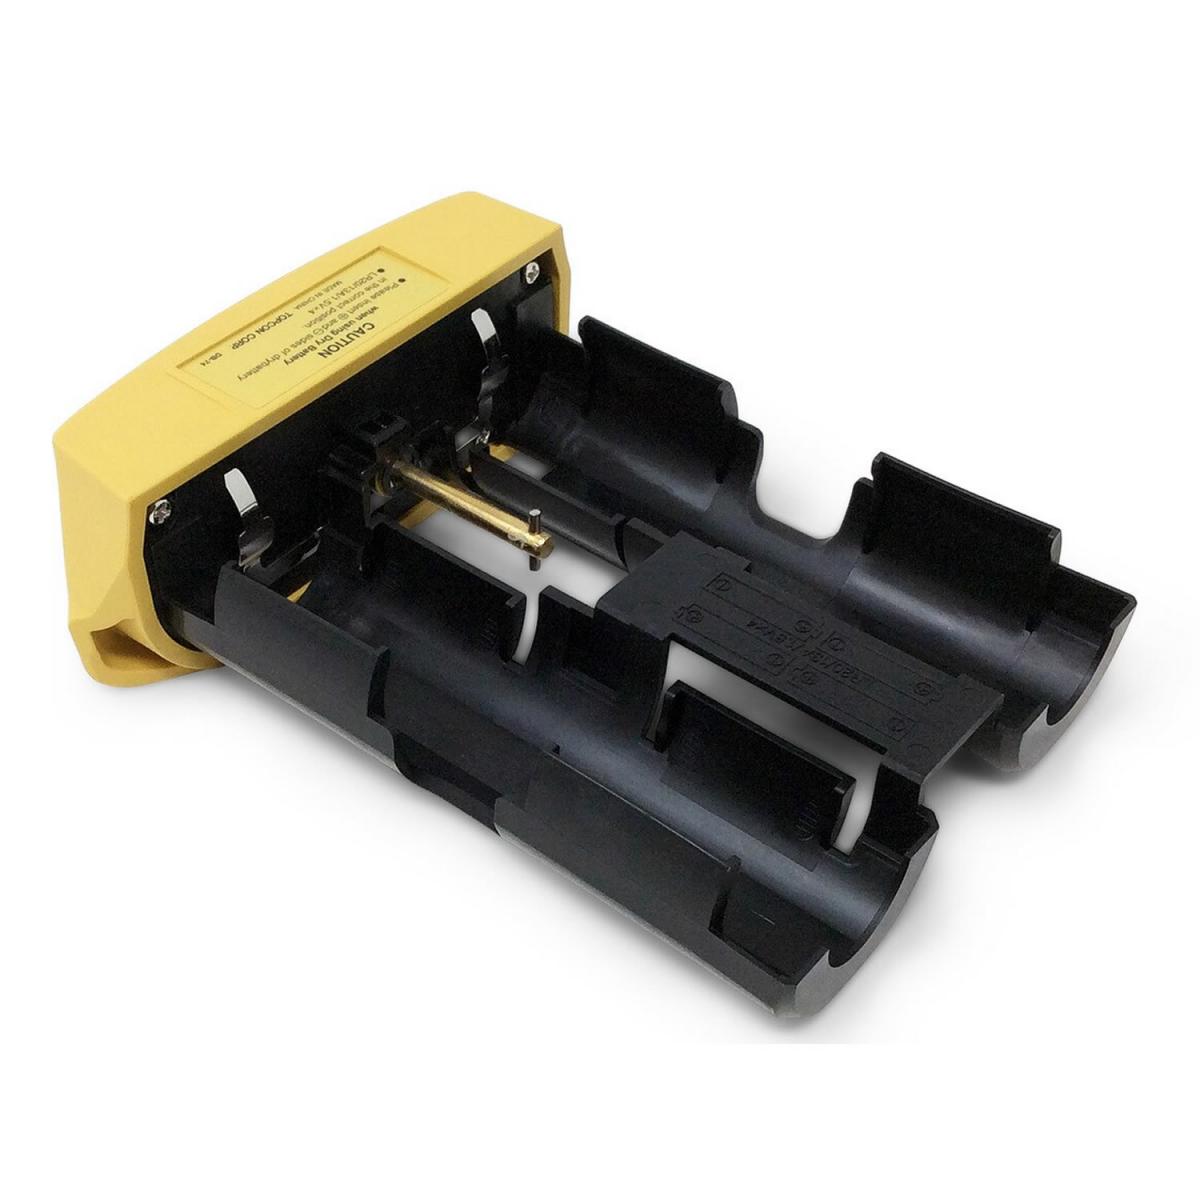 Topcon Rechargeable Battery Holder for RL-200 Series Grade Laser (314930702)